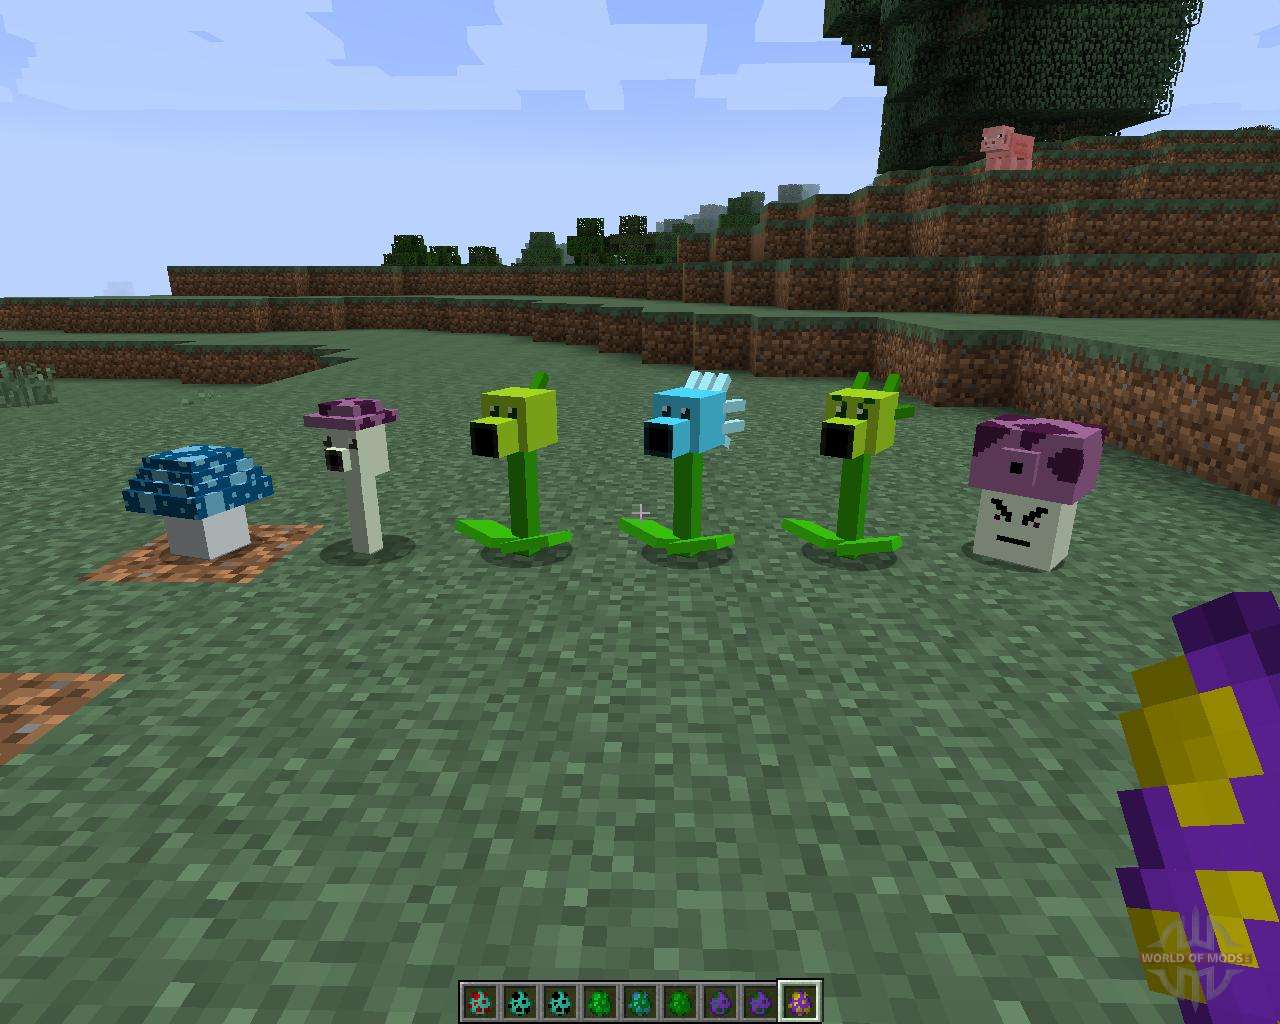 minecraft plants vs zombies forge download 1.7.1